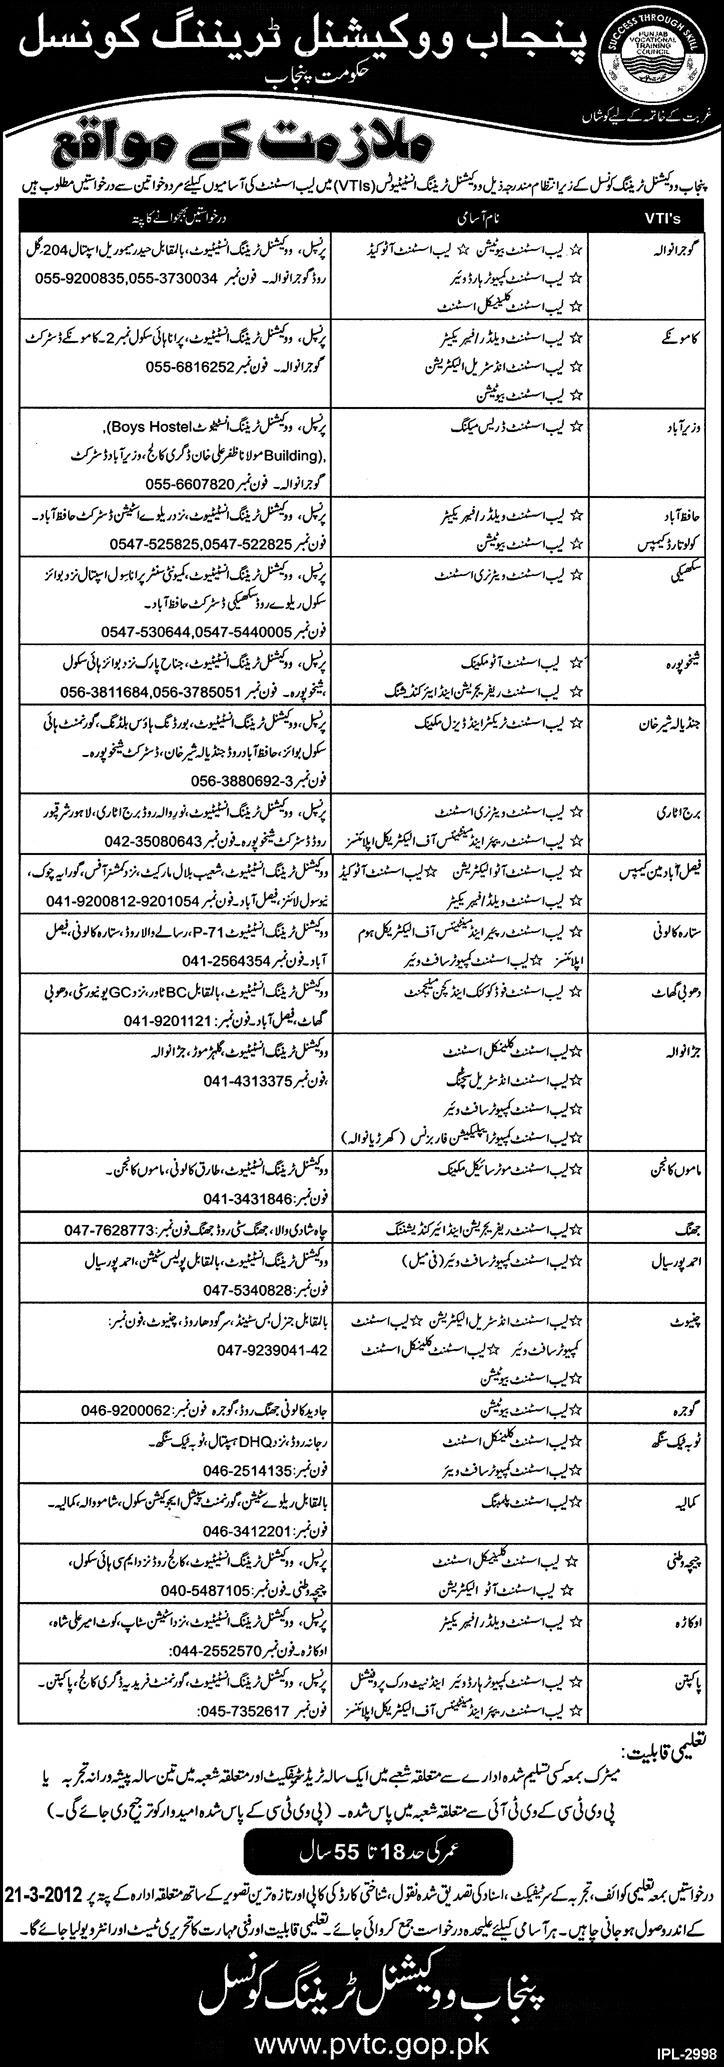 Punjab Vocational Training Council, Government of the Punjab Jobs Opportunity